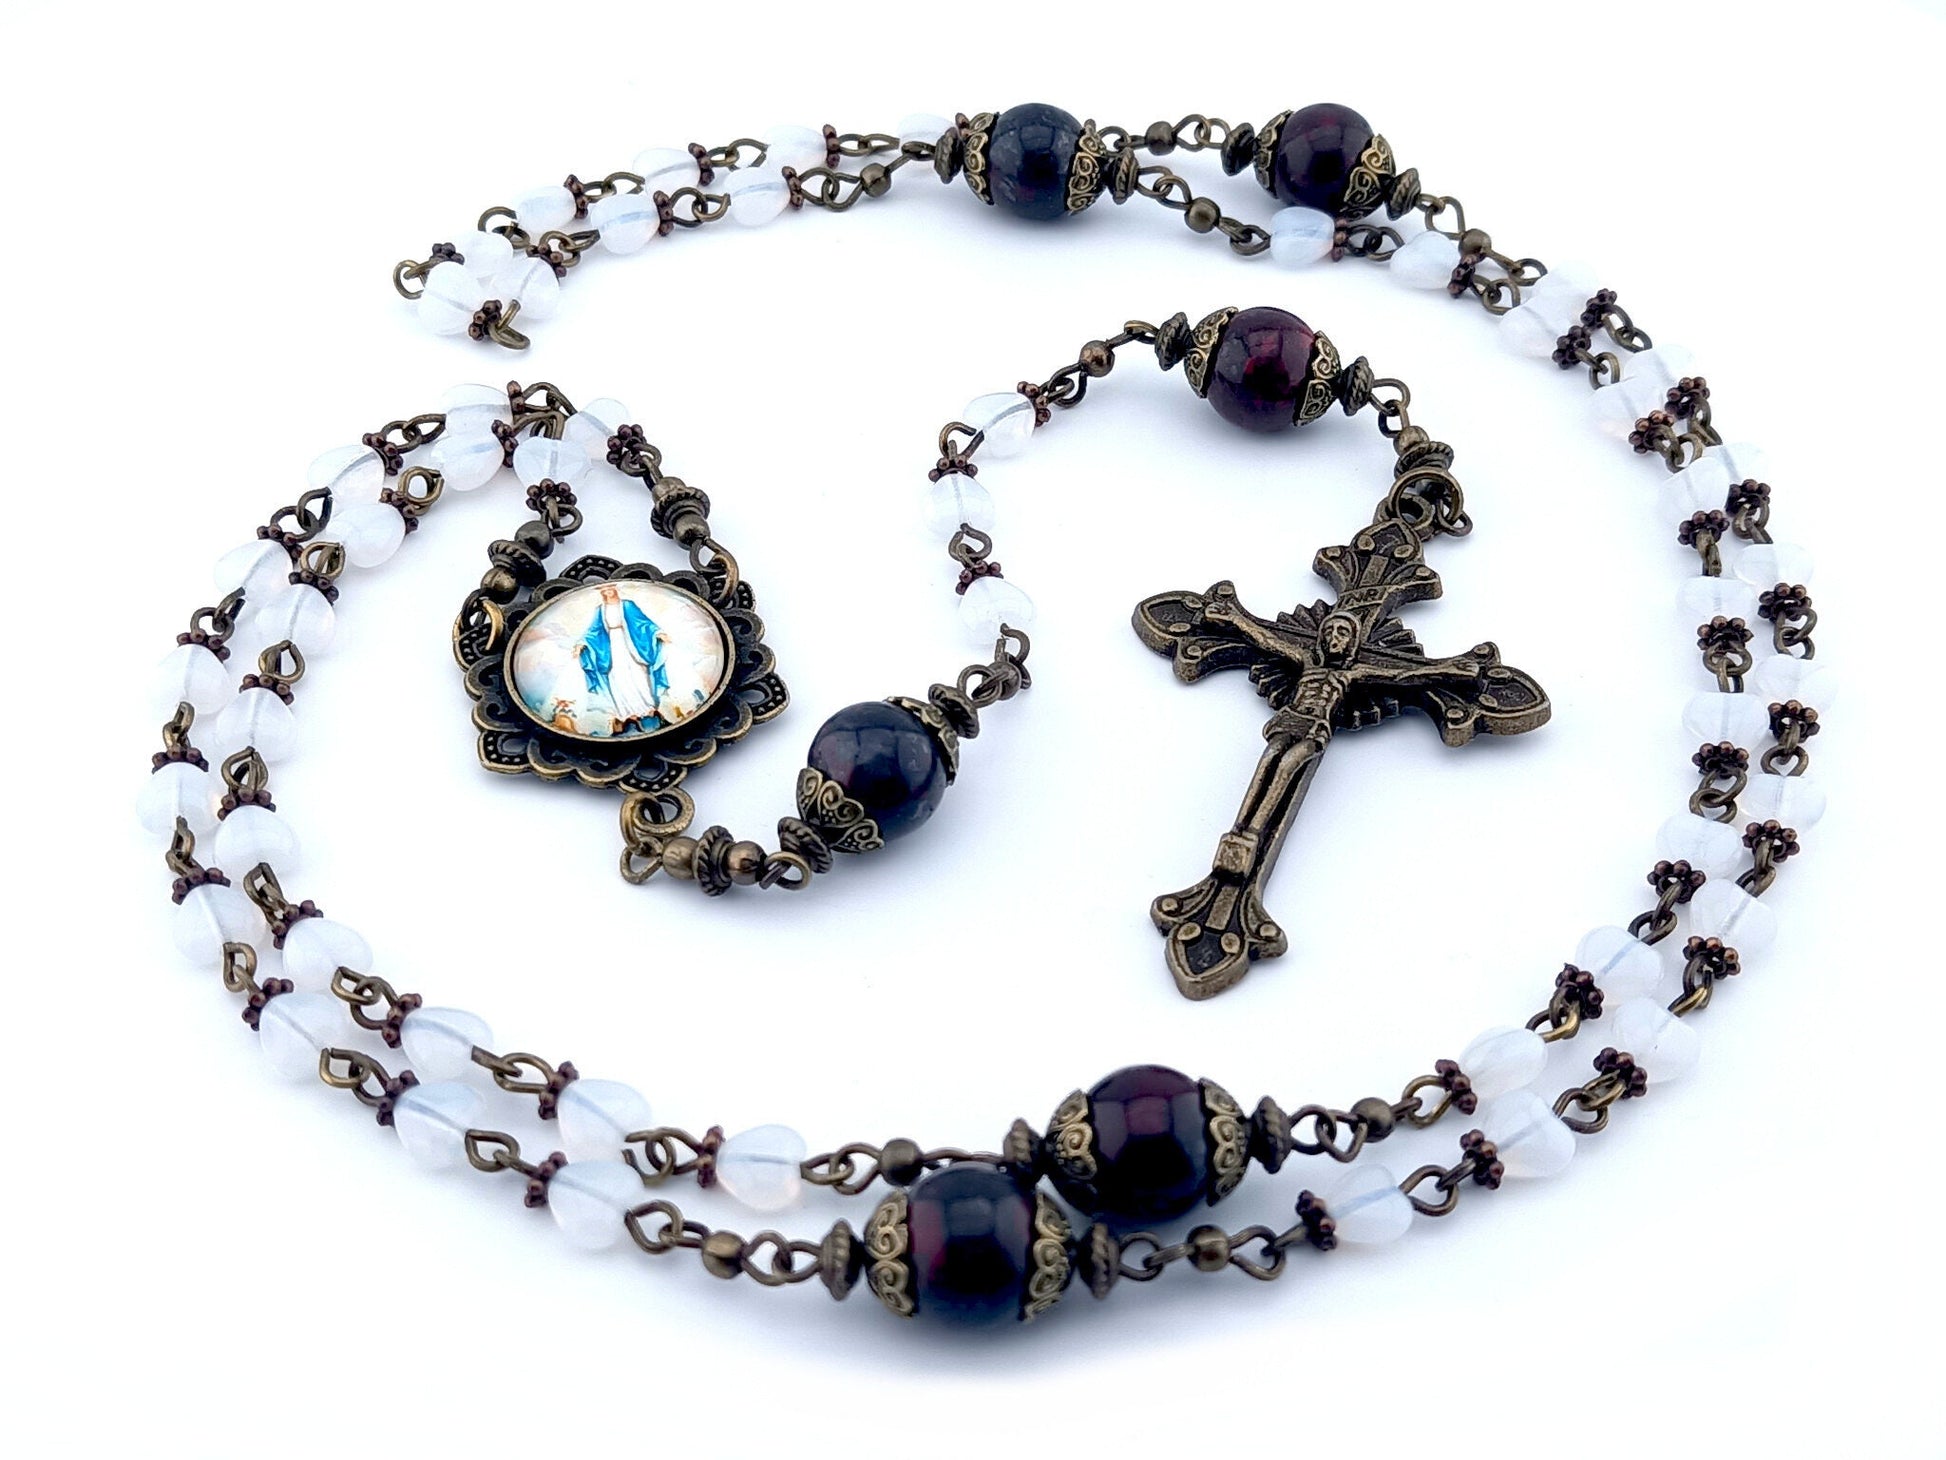 Our Lady of Grace unique rosary beads with white heart glass beads, deep red jade gemstone pater beads, bronze crucifix, picture centre medal and bead caps.